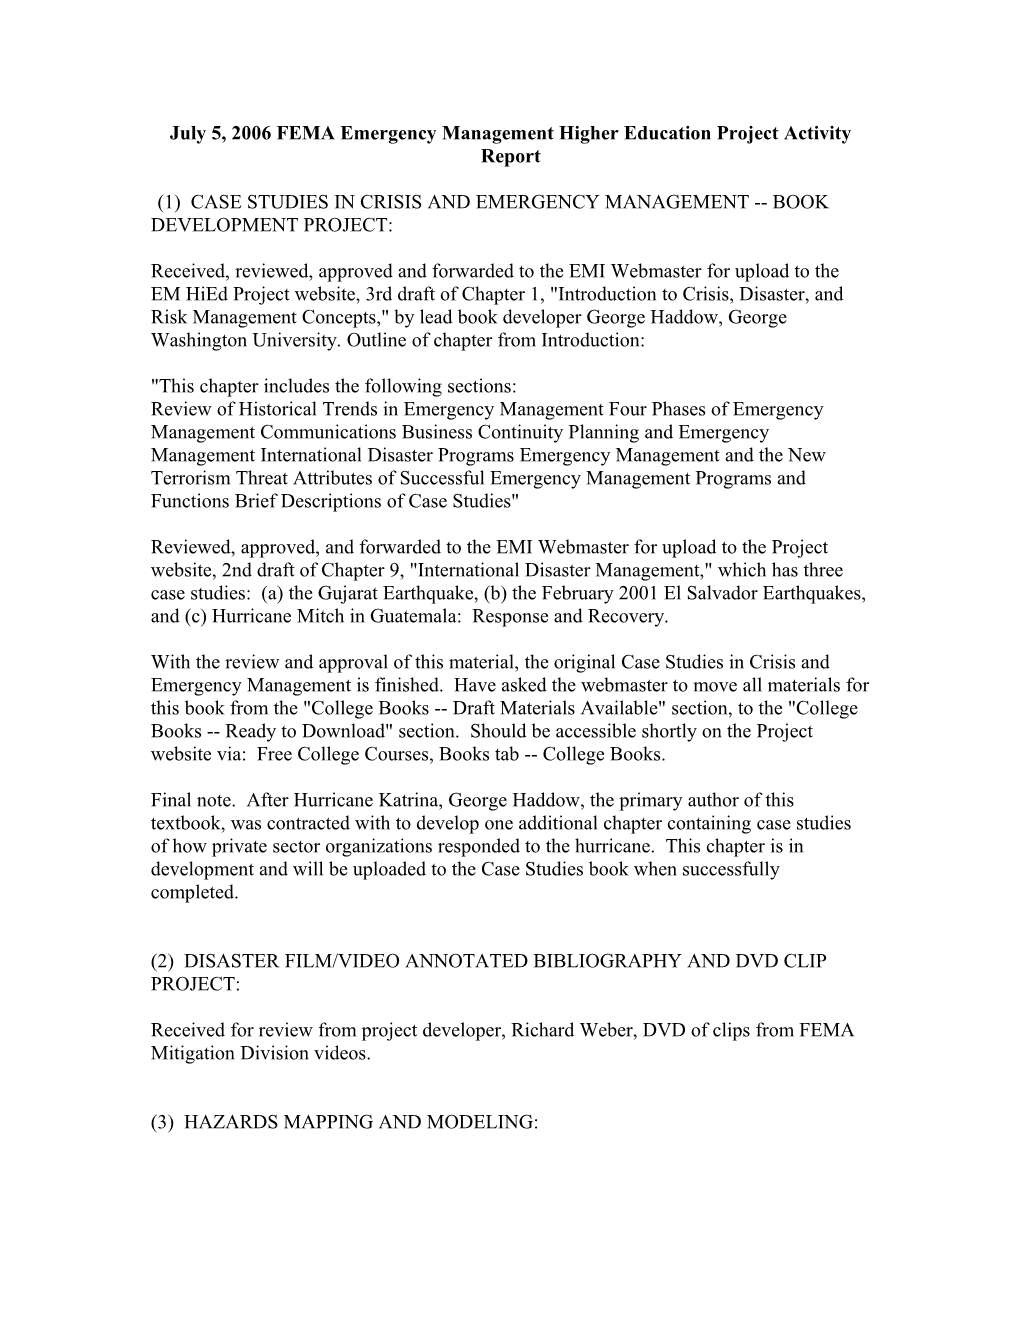 July 5, 2006 FEMA Emergency Management Higher Education Project Activity Report